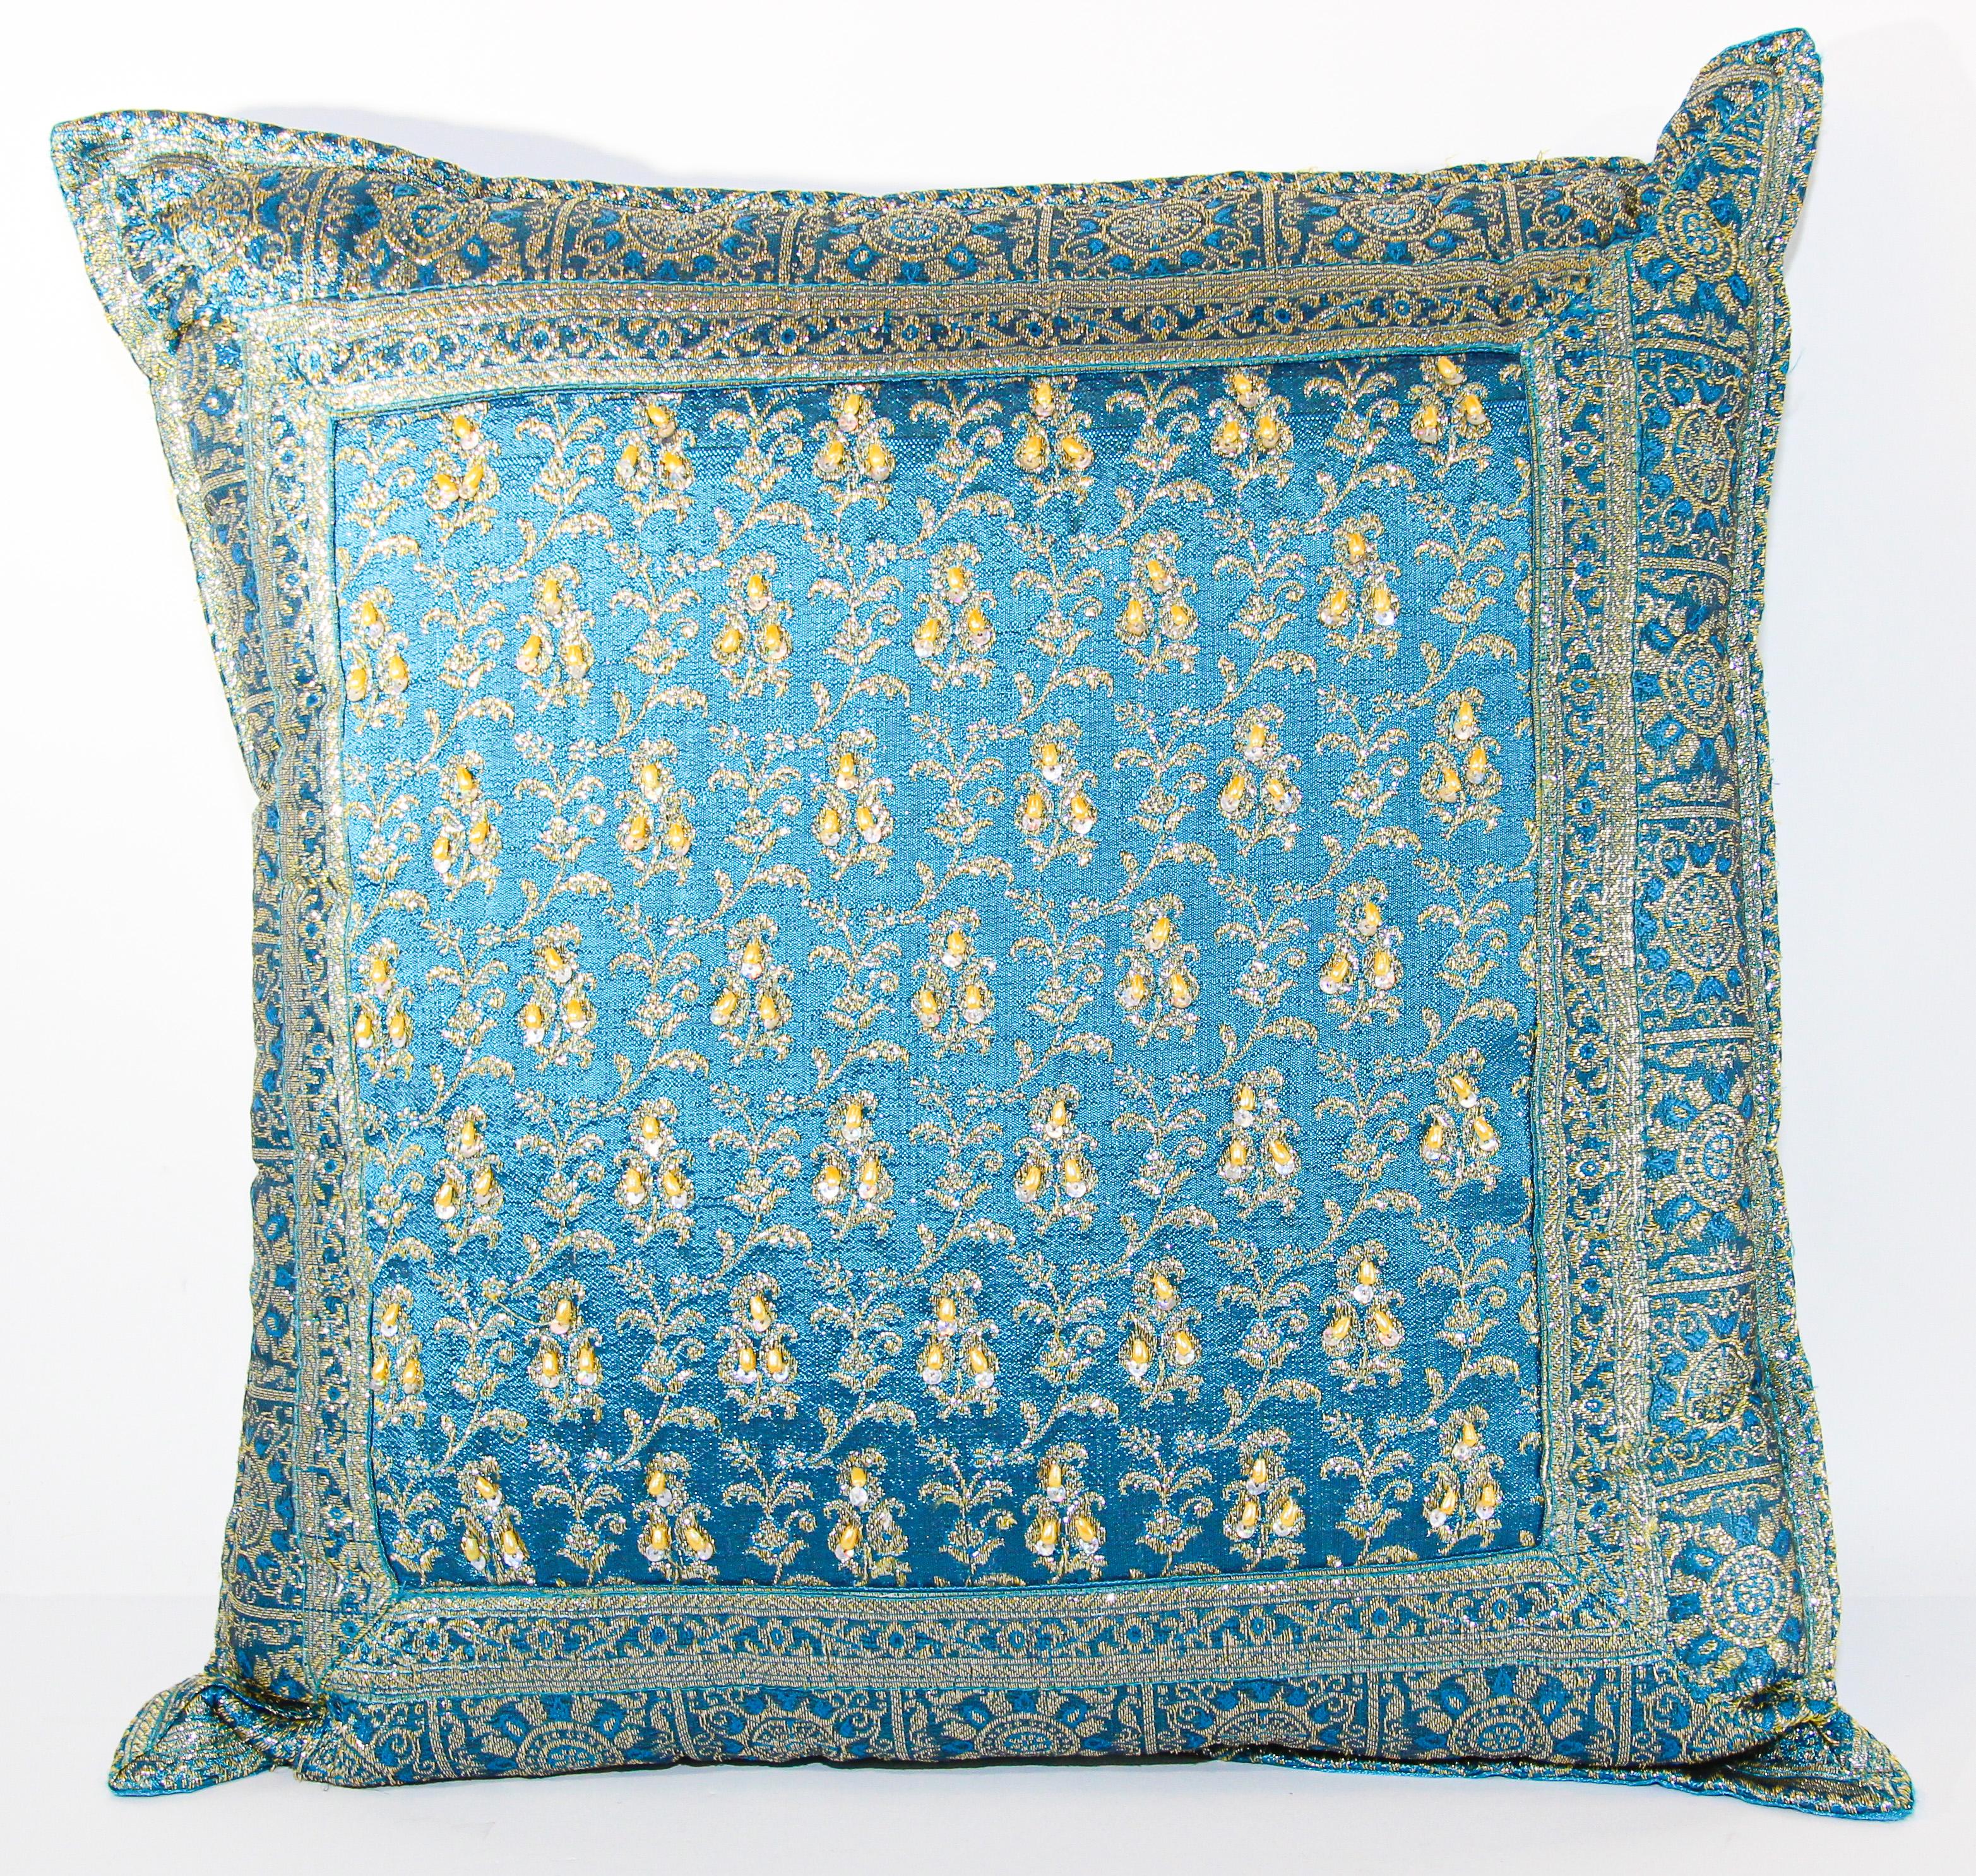 Vintage Throw decorative accent turquoise Mughal style pillow embroidered and embellished with sequins with Moorish metallic threads, silver beads embroidery on turquoise.
Heavily embellished border of metallic embroidery Moorish